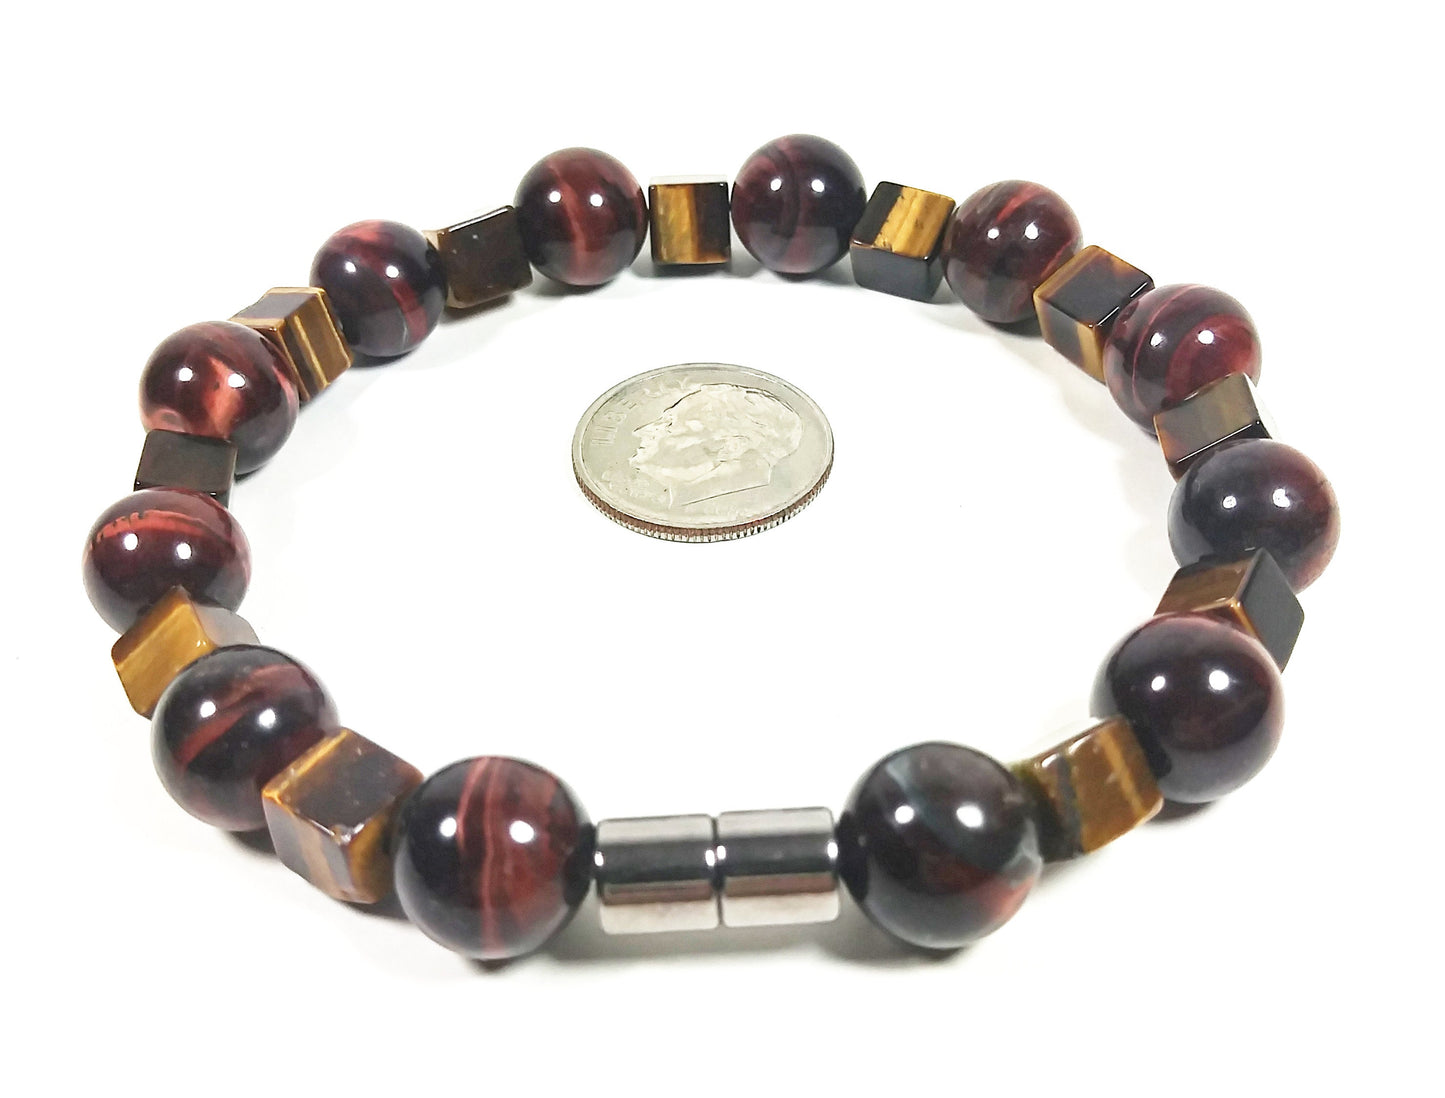 Red & Yellow Tiger Eye Bead Bracelet For Men And Women - Confidence - Motivation -Super Strong Magnetic Clasp